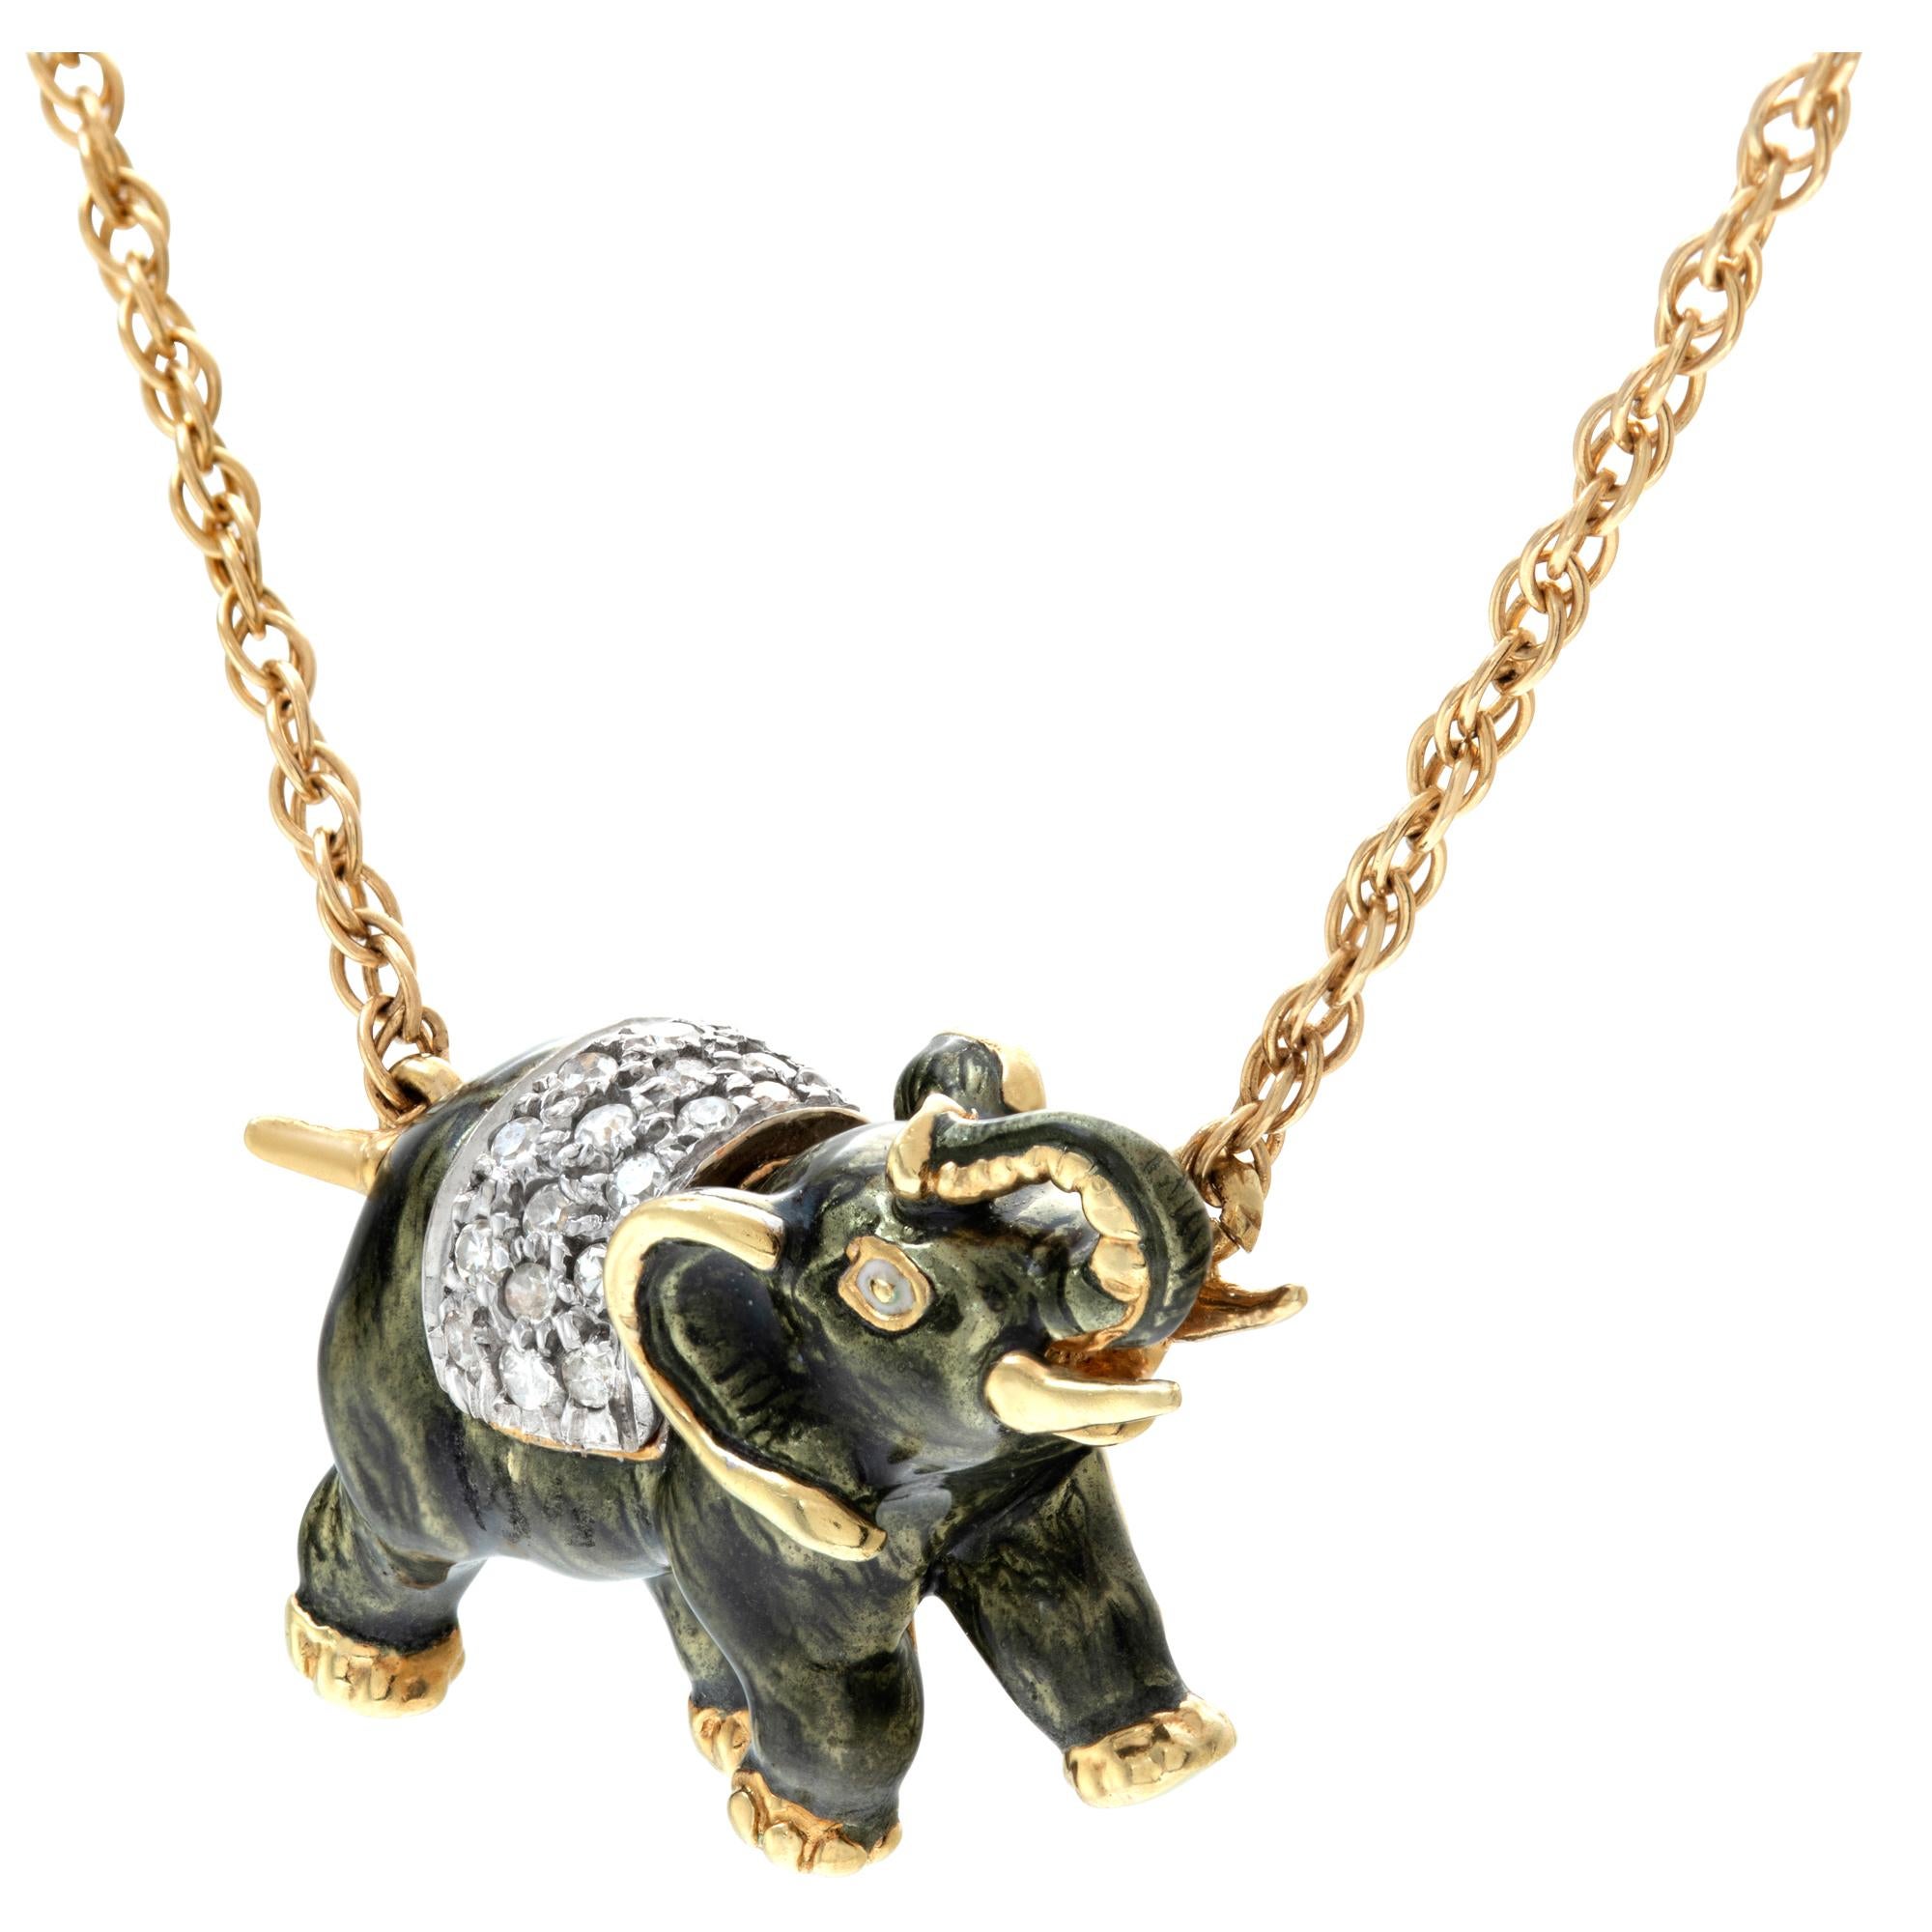 Elephant necklace in 14k gold with 0.25 carats in diamond accents G-H color In Excellent Condition For Sale In Surfside, FL